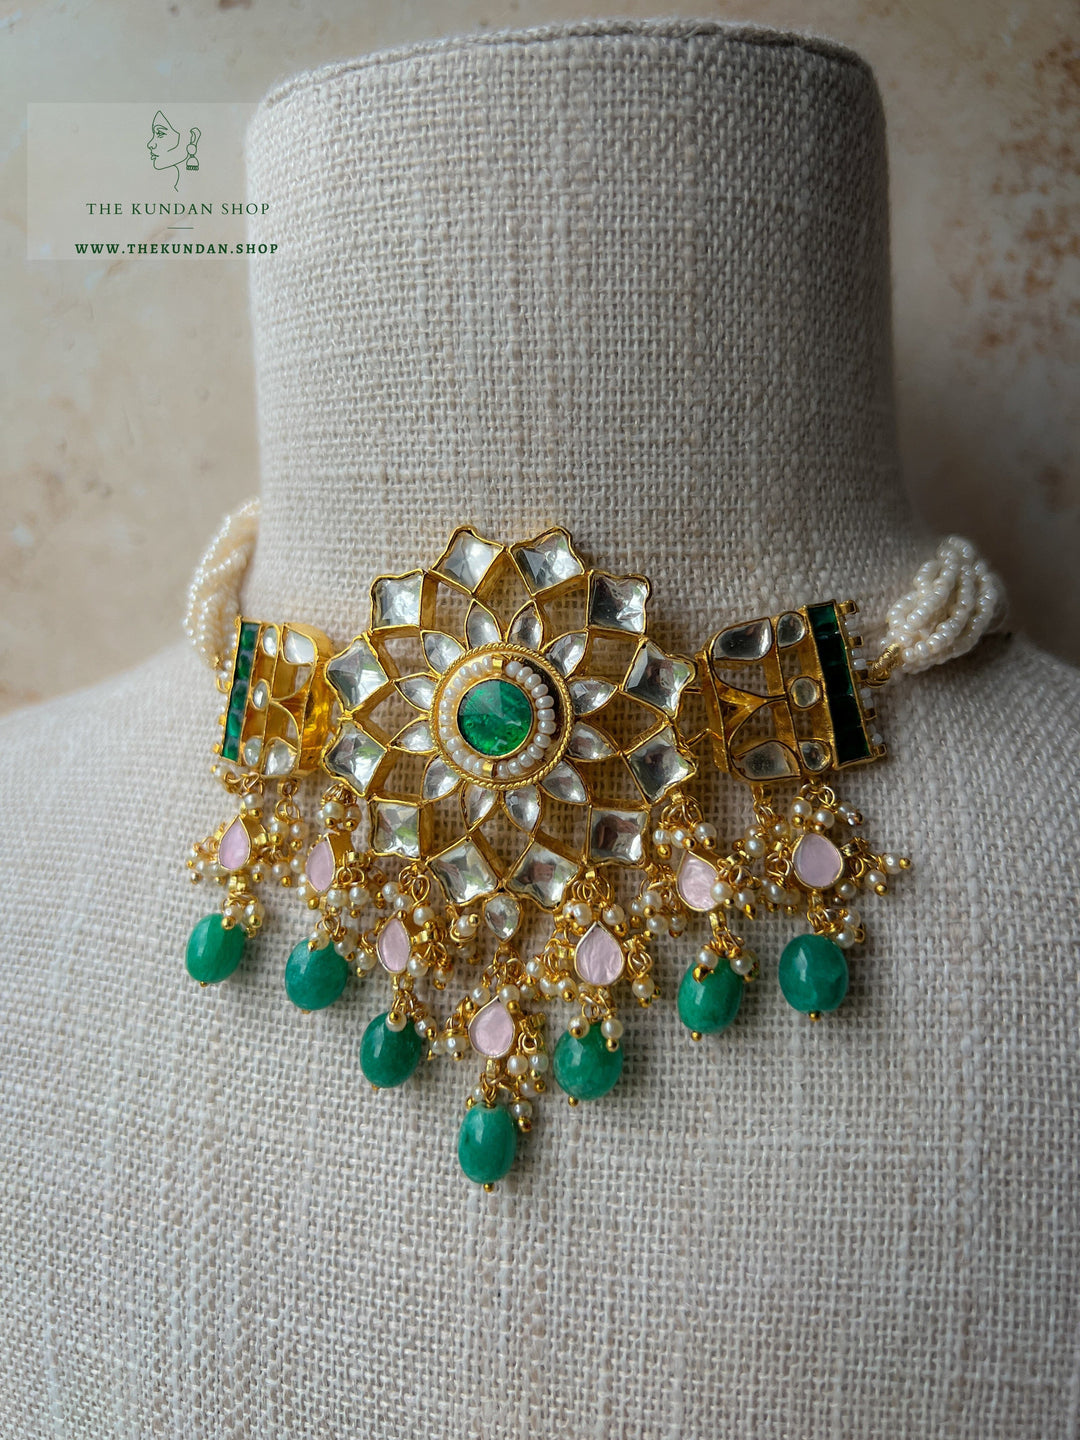 Calm Florals in Pink & Green Necklace Sets THE KUNDAN SHOP 